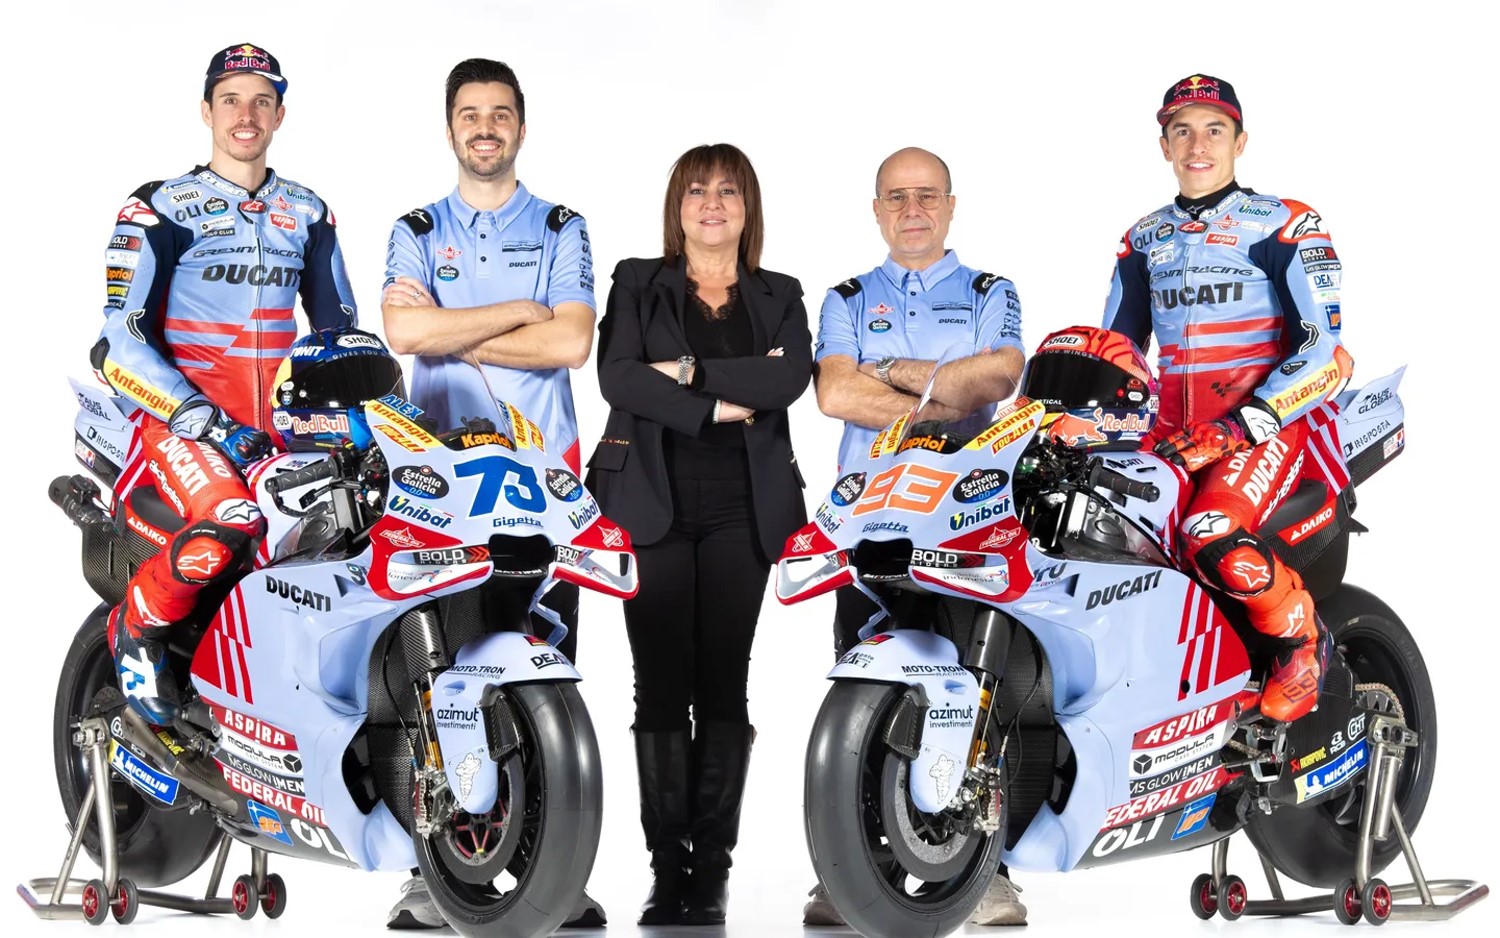 Bothers Marc Marquez and Alex Marquez pose with their Gresini Ducati Desmosedicis and team owner Nadia Padovani. Image: Supplied by Gresini Racing